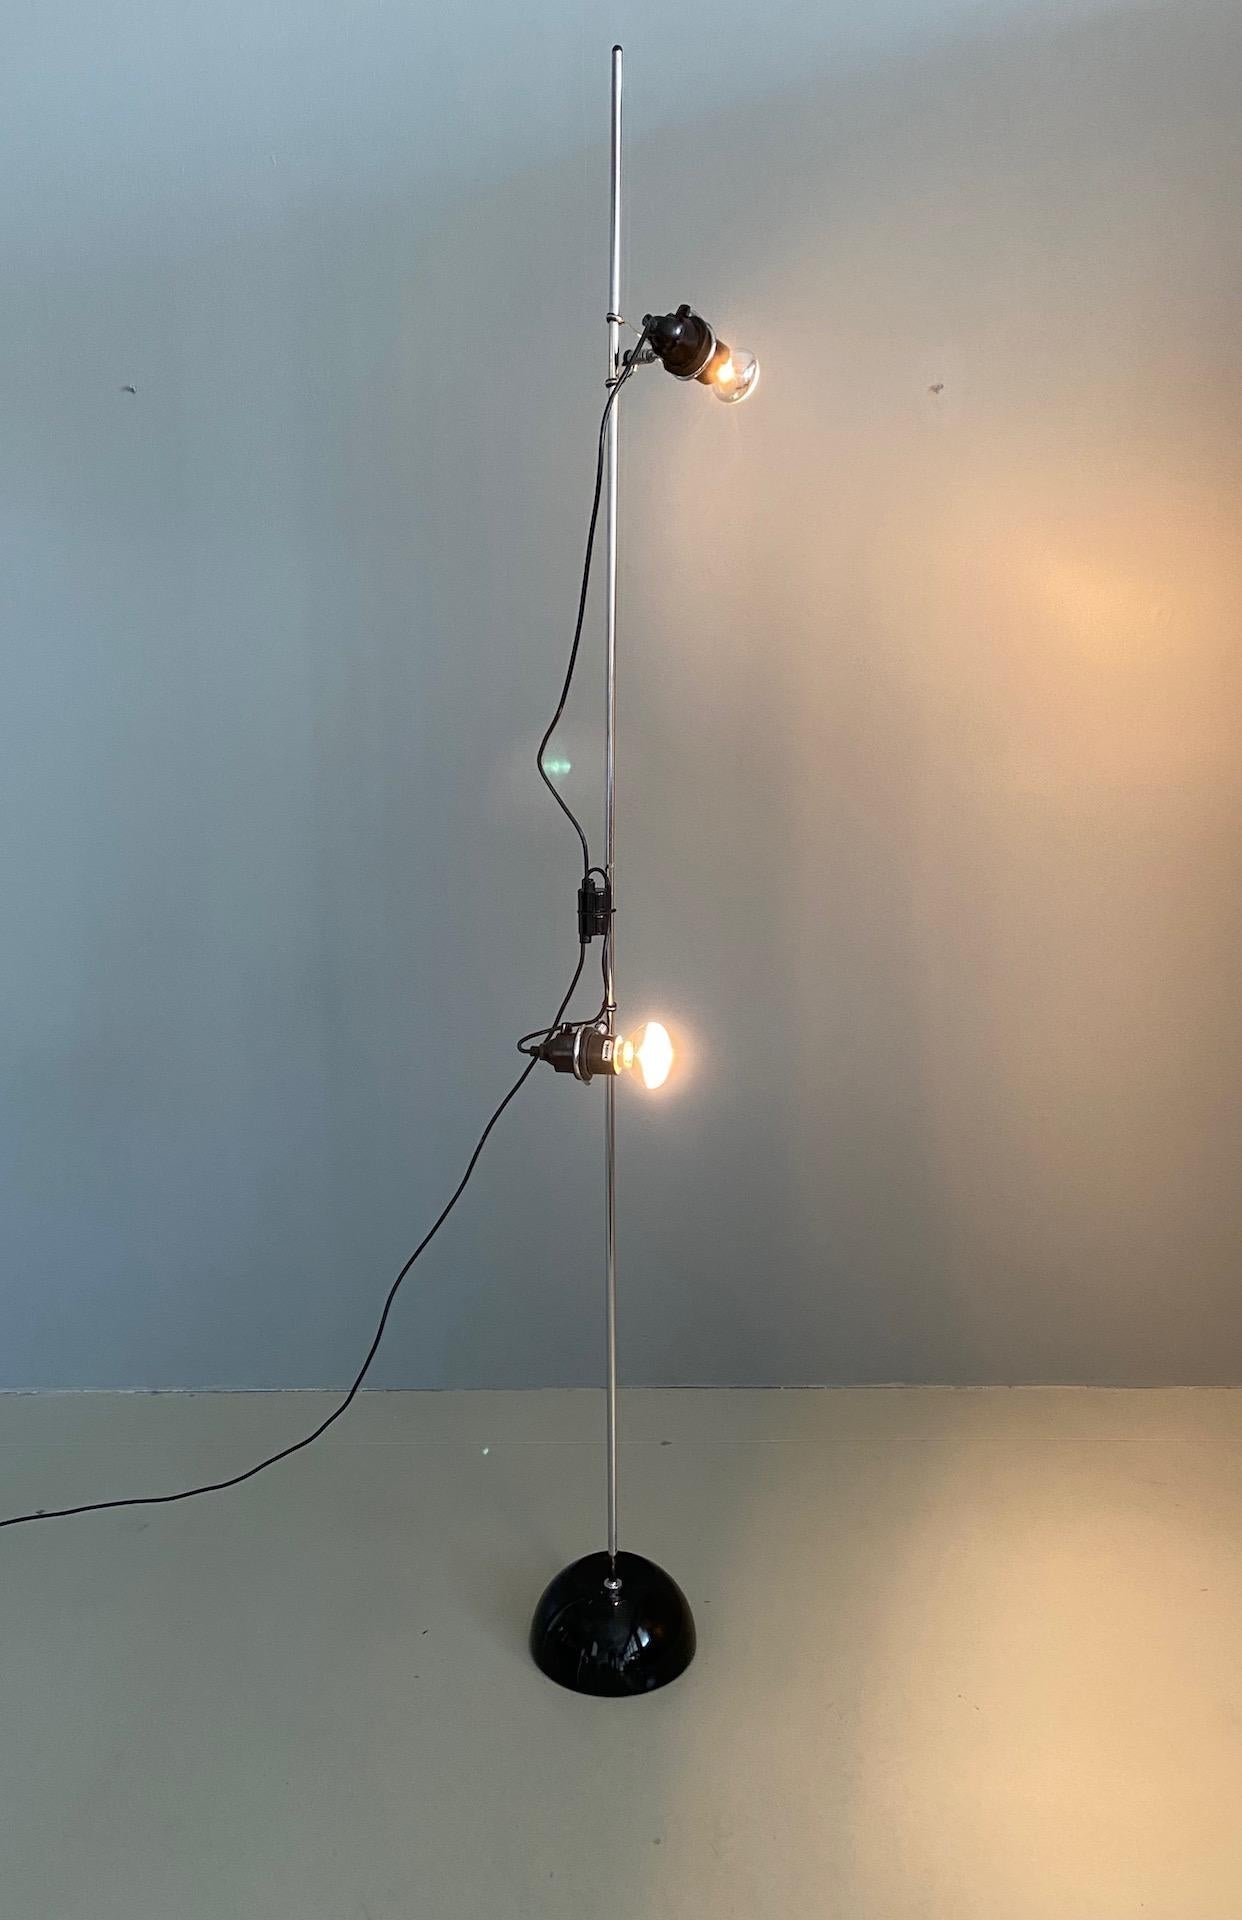 Fantastic Italian floor lamp by Harvey Guzzini 2 multi positional bulb holders, switched individually, can be angled in any position and can be moved up and down the central stem which drops into a heavy lacquered black base.